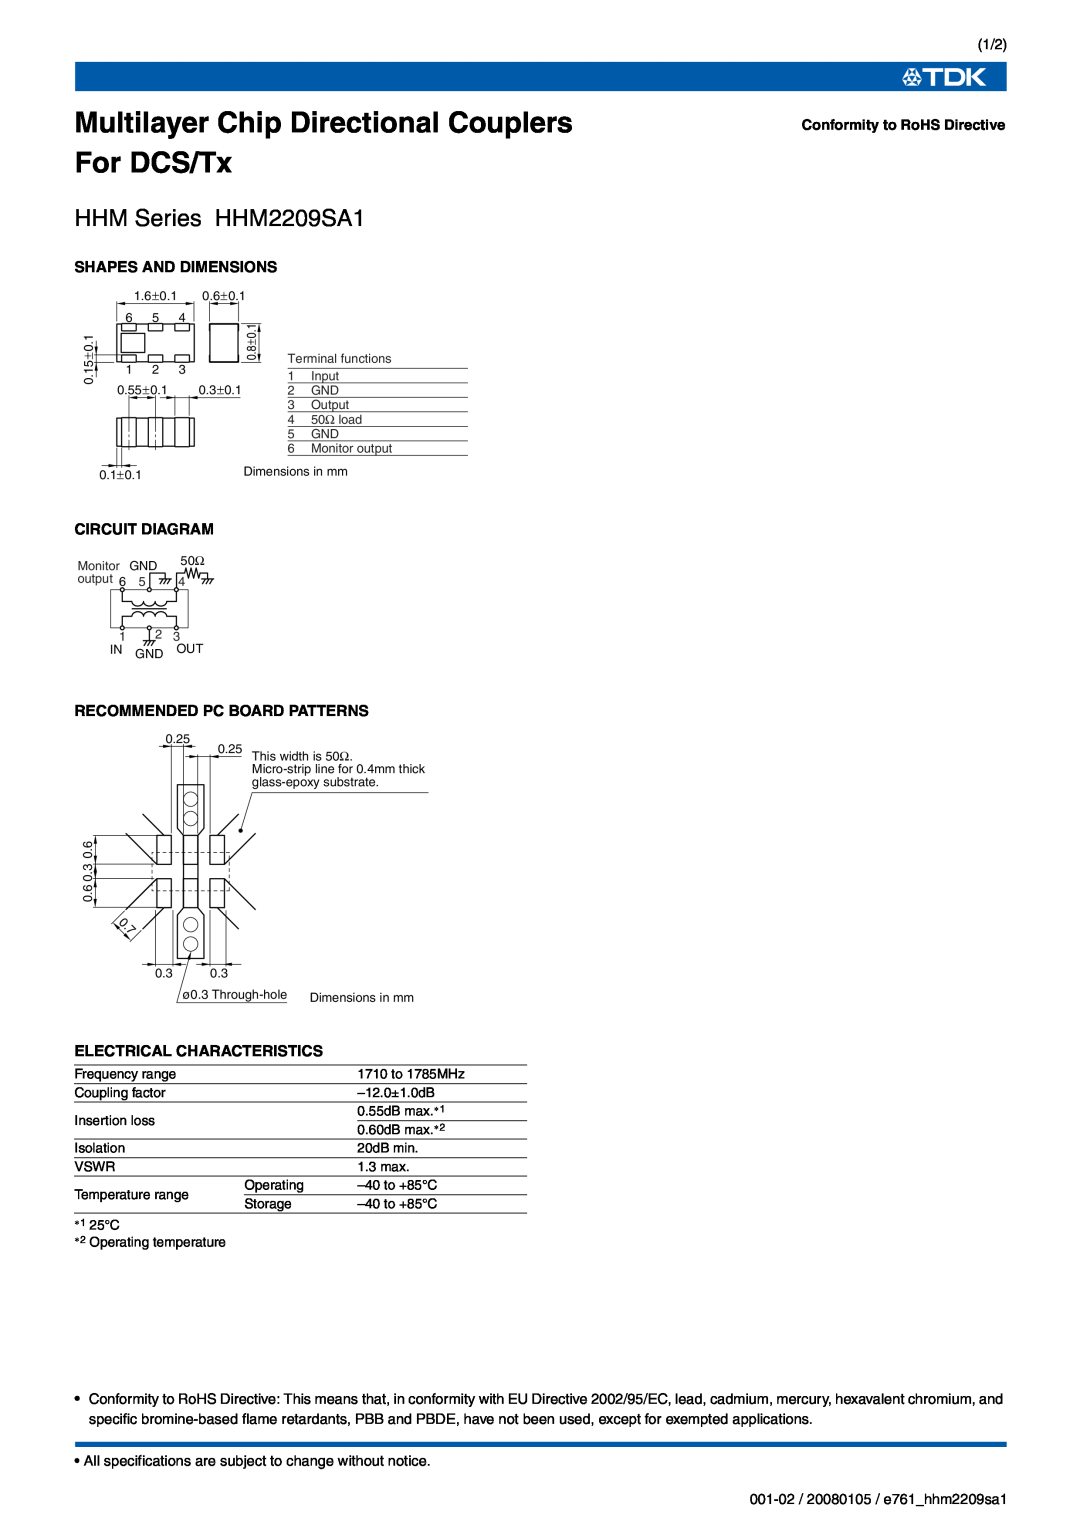 TDK HHM Series HHM2209SA1 specifications Shapes And Dimensions, Conformity to RoHS Directive, Circuit Diagram 